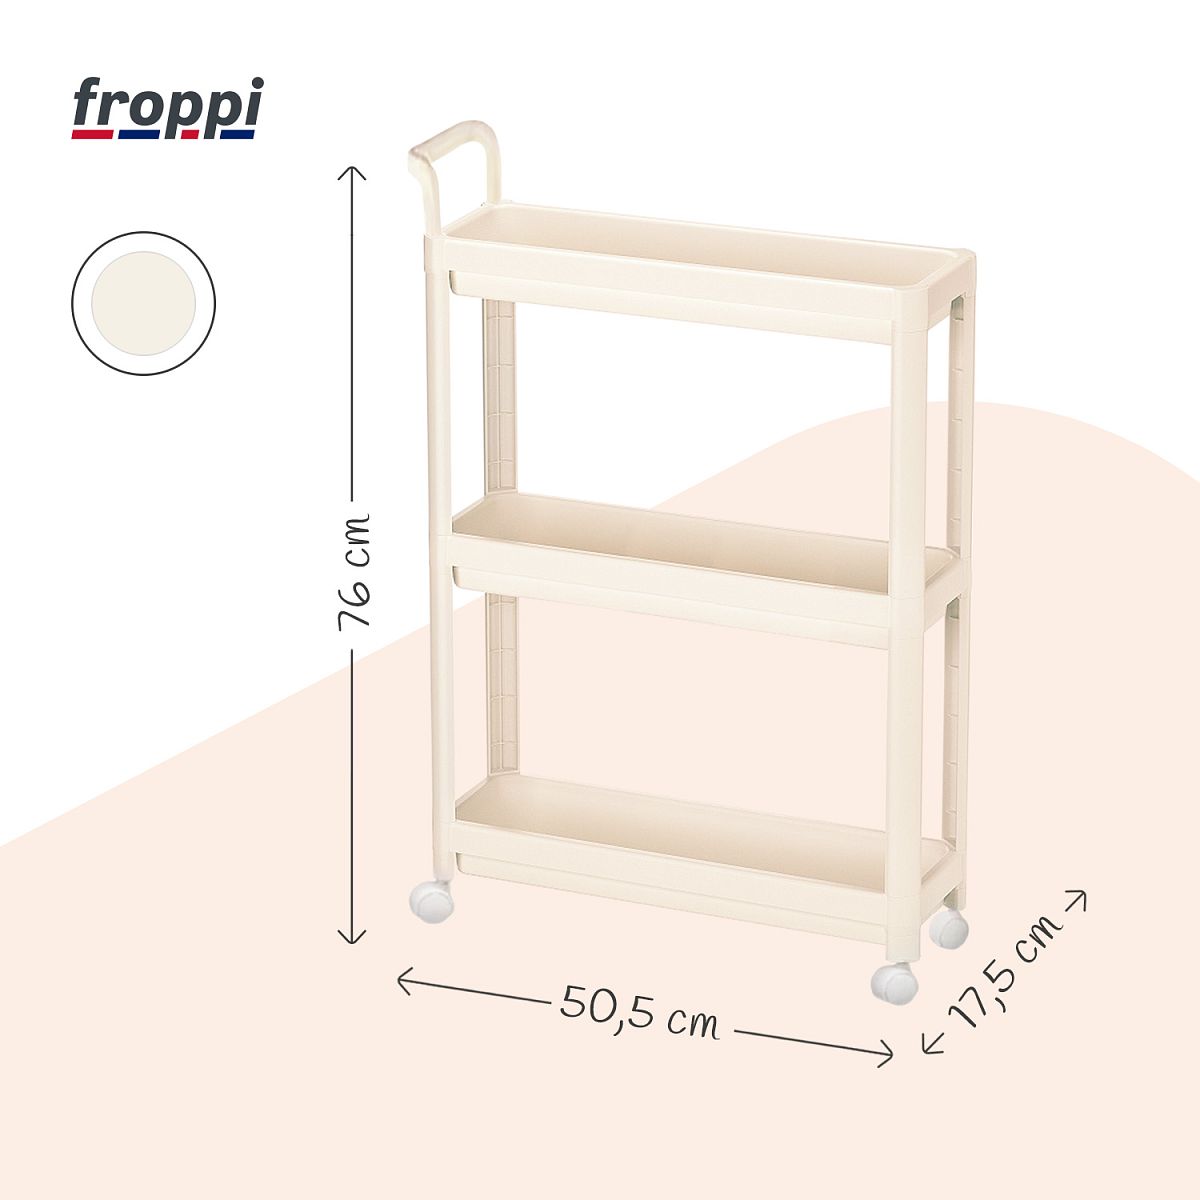 Kitchen Bath Trolley Tiered Multi-purpose Plastic Organiser with Handle and Wheels by Froppi